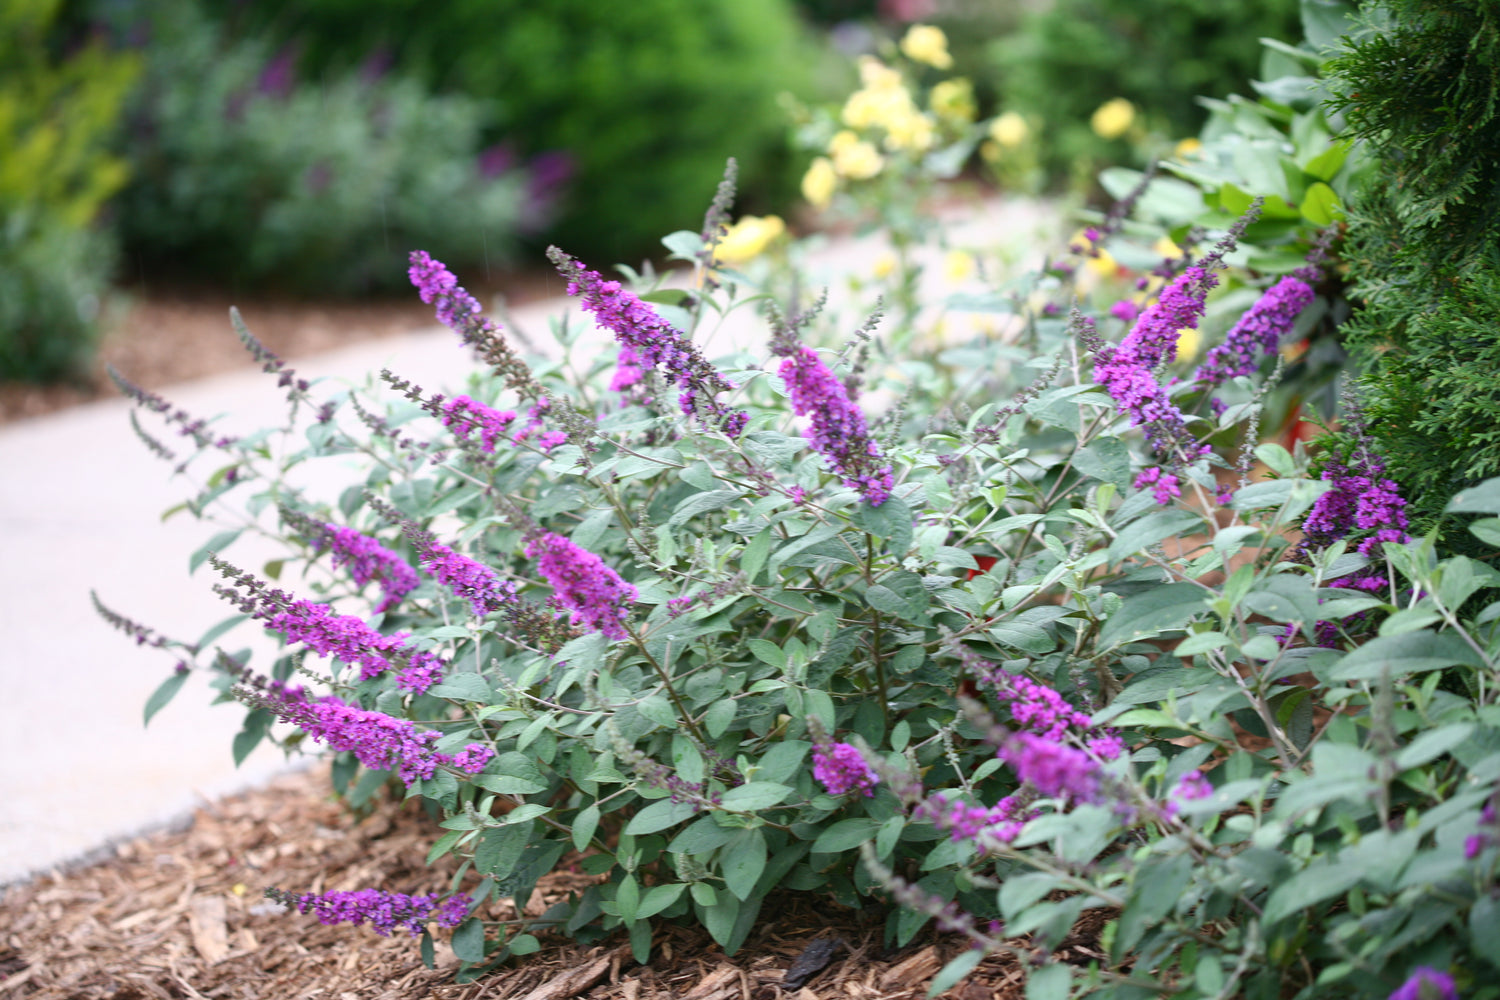 The dwarf habit and silvery foliage of Lo and Behold Blue Chip Junior buddleia